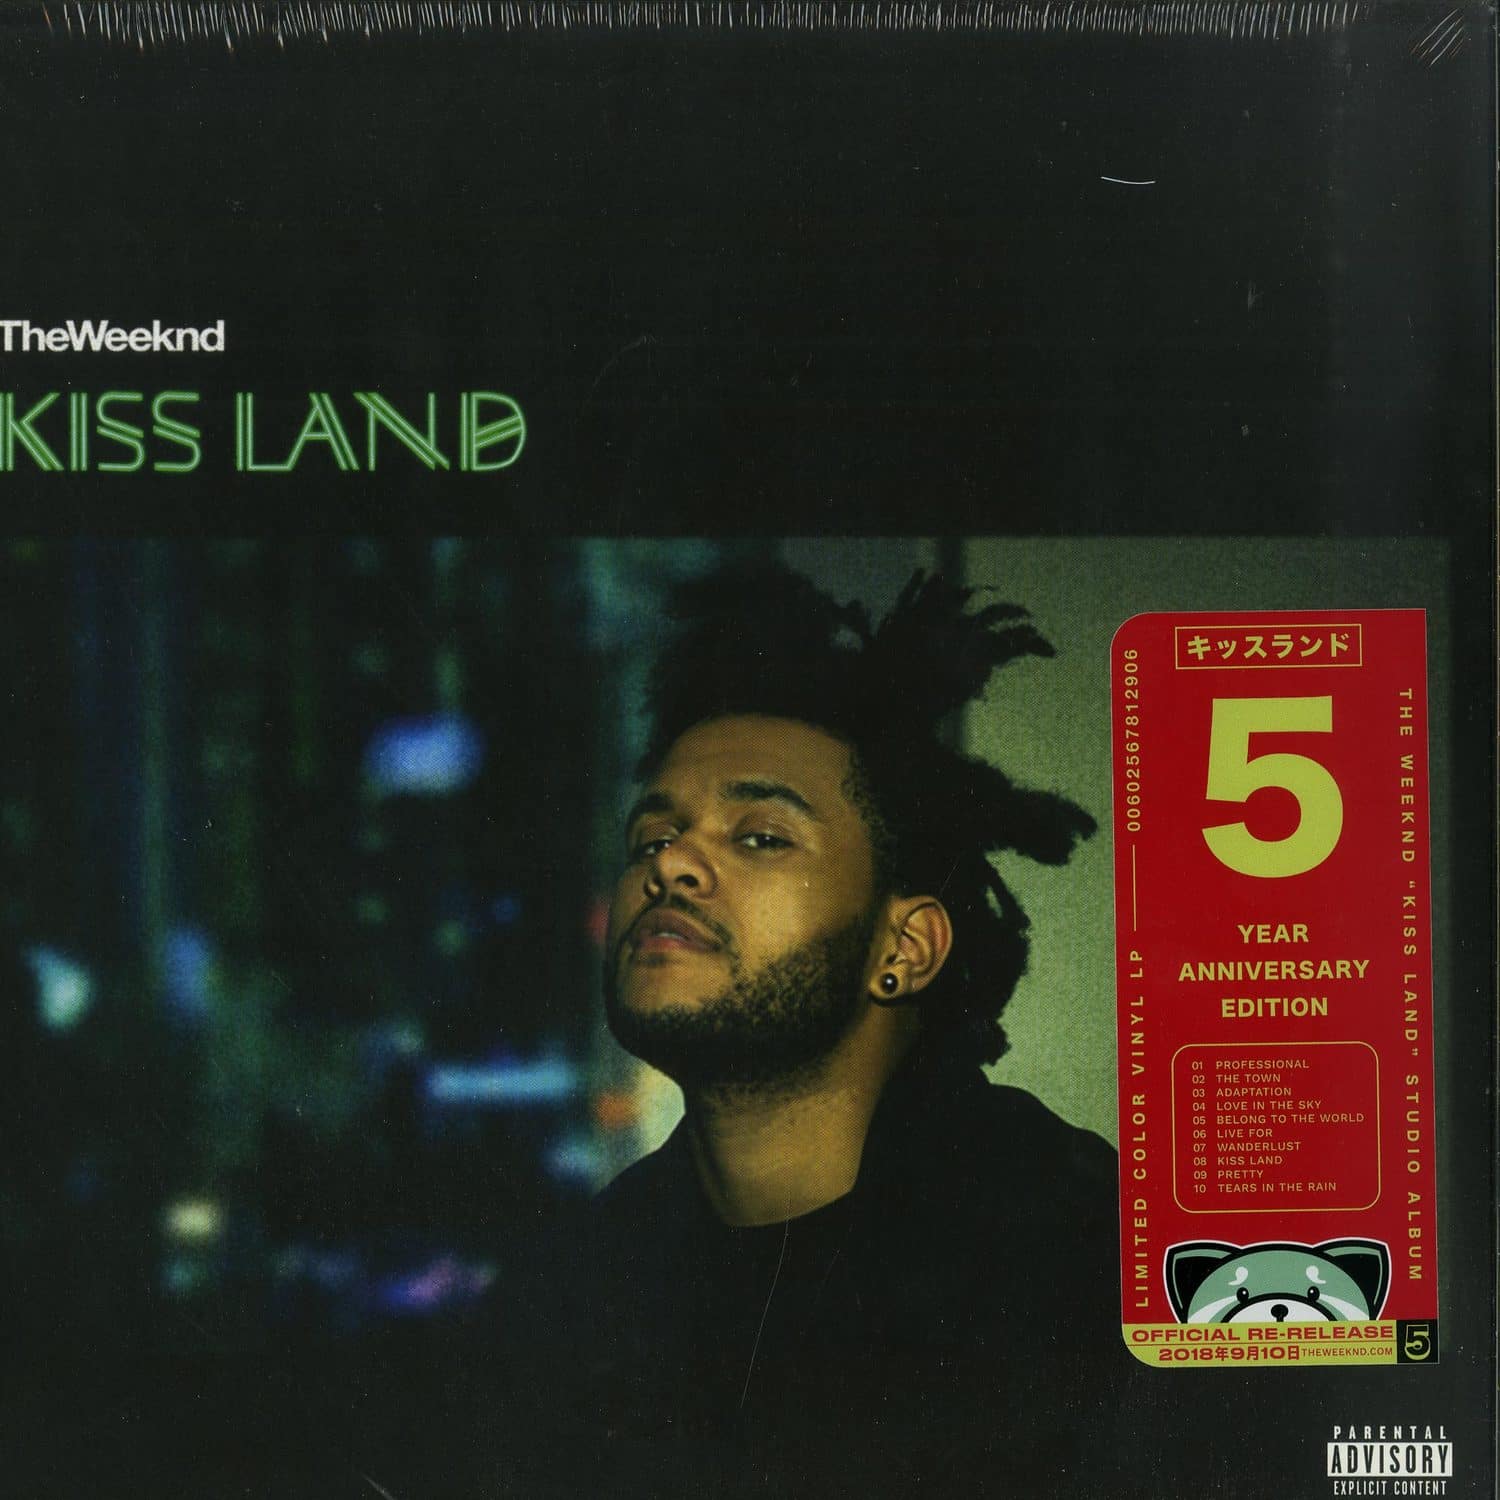 The Weeknd - KISS LAND 